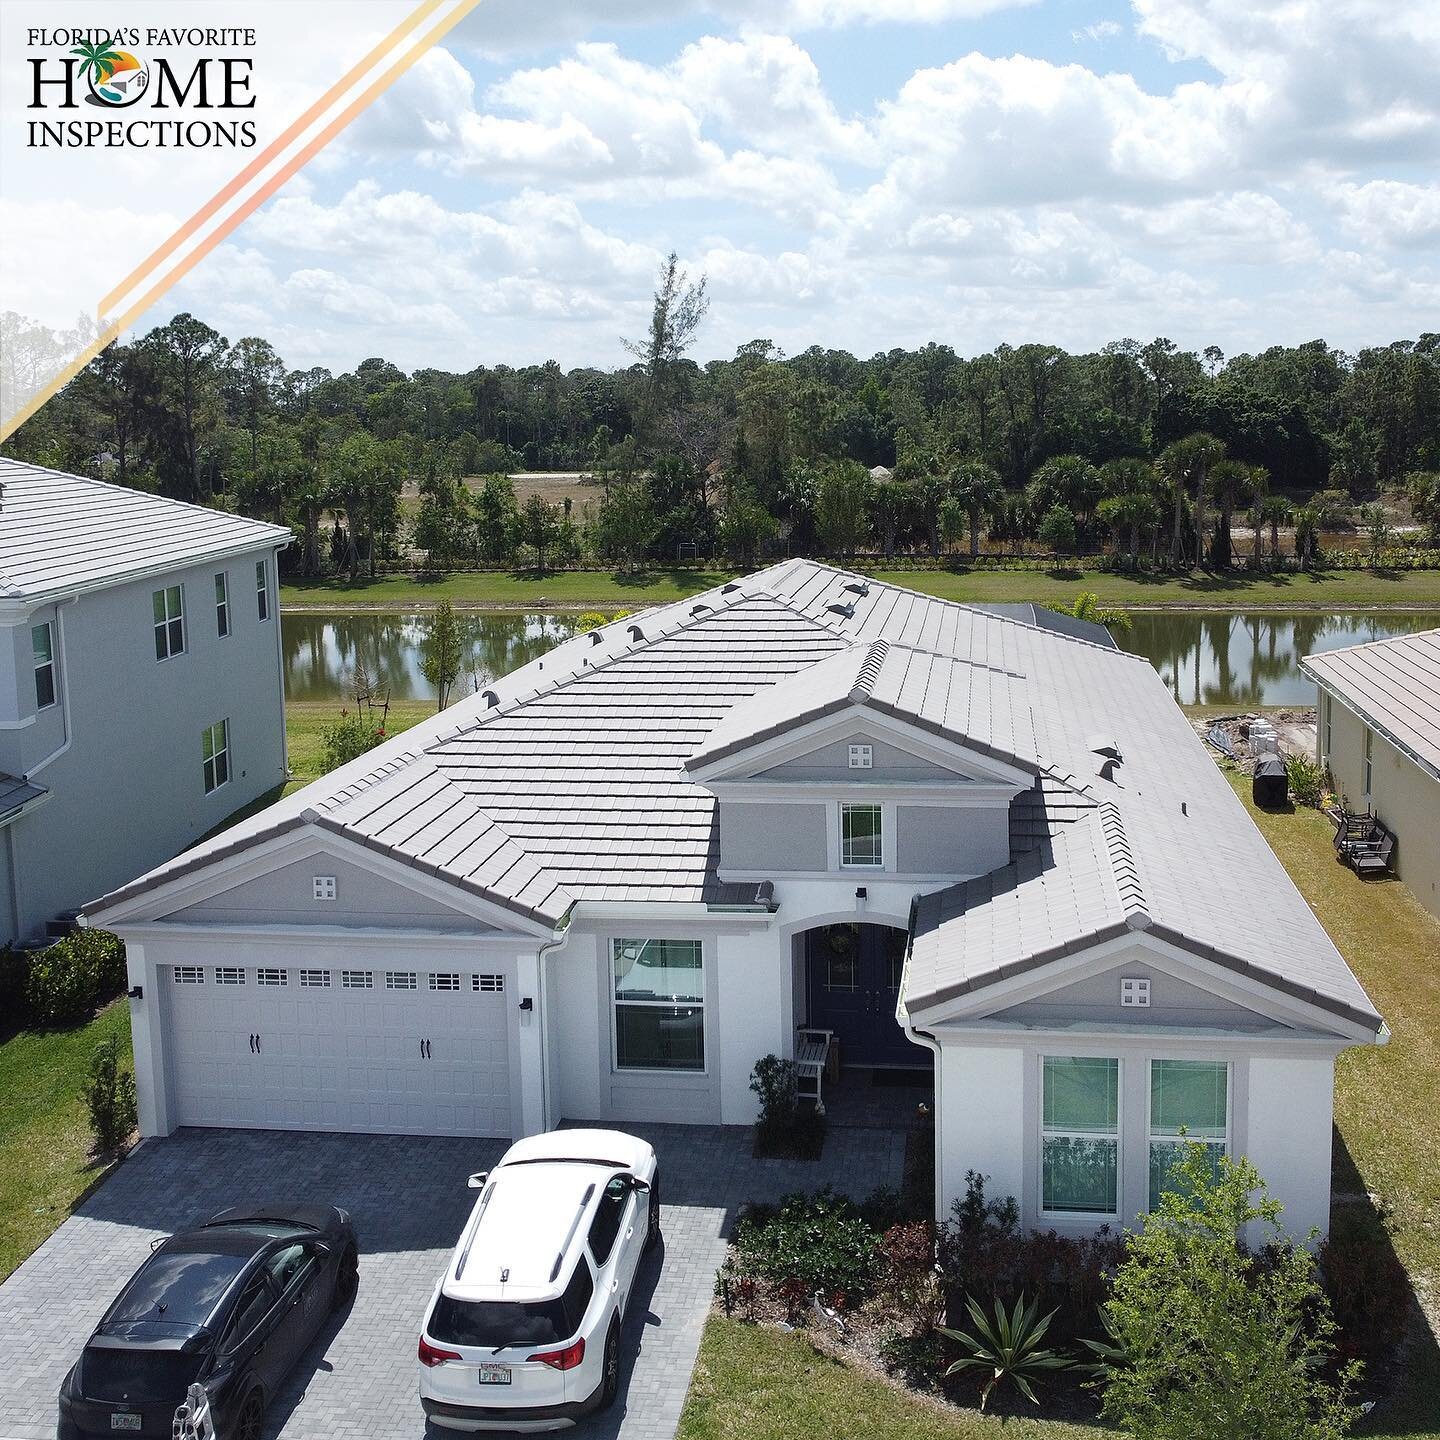 Home inspection in Palm Beach County, Florida!